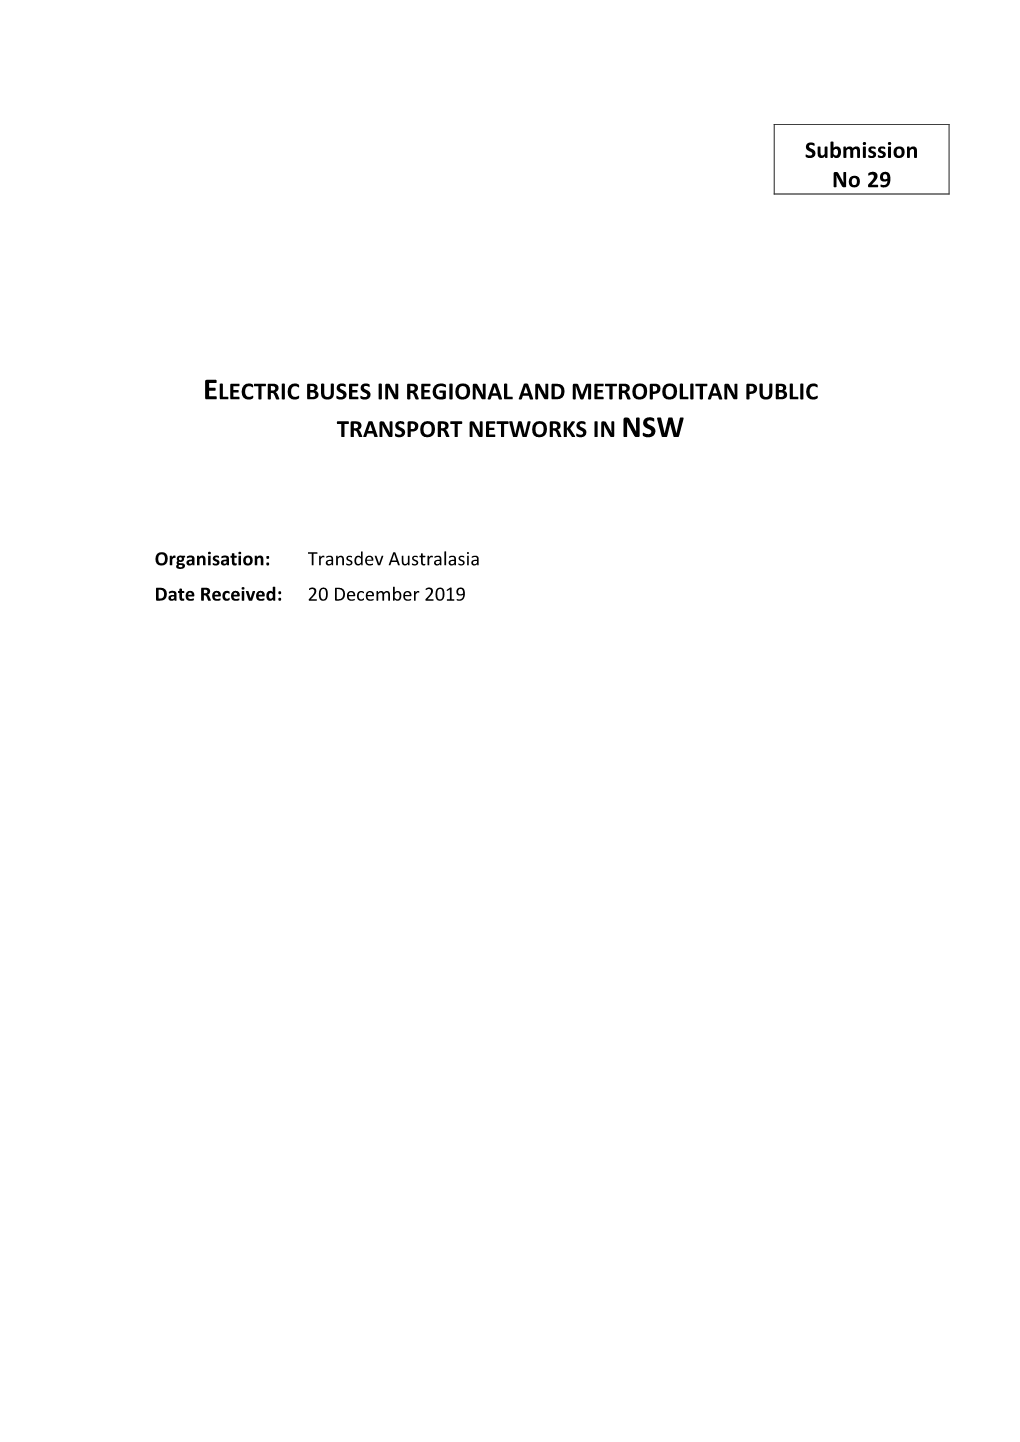 Submission No 29 ELECTRIC BUSES in REGIONAL and METROPOLITAN PUBLIC TRANSPORT NETWORKS IN